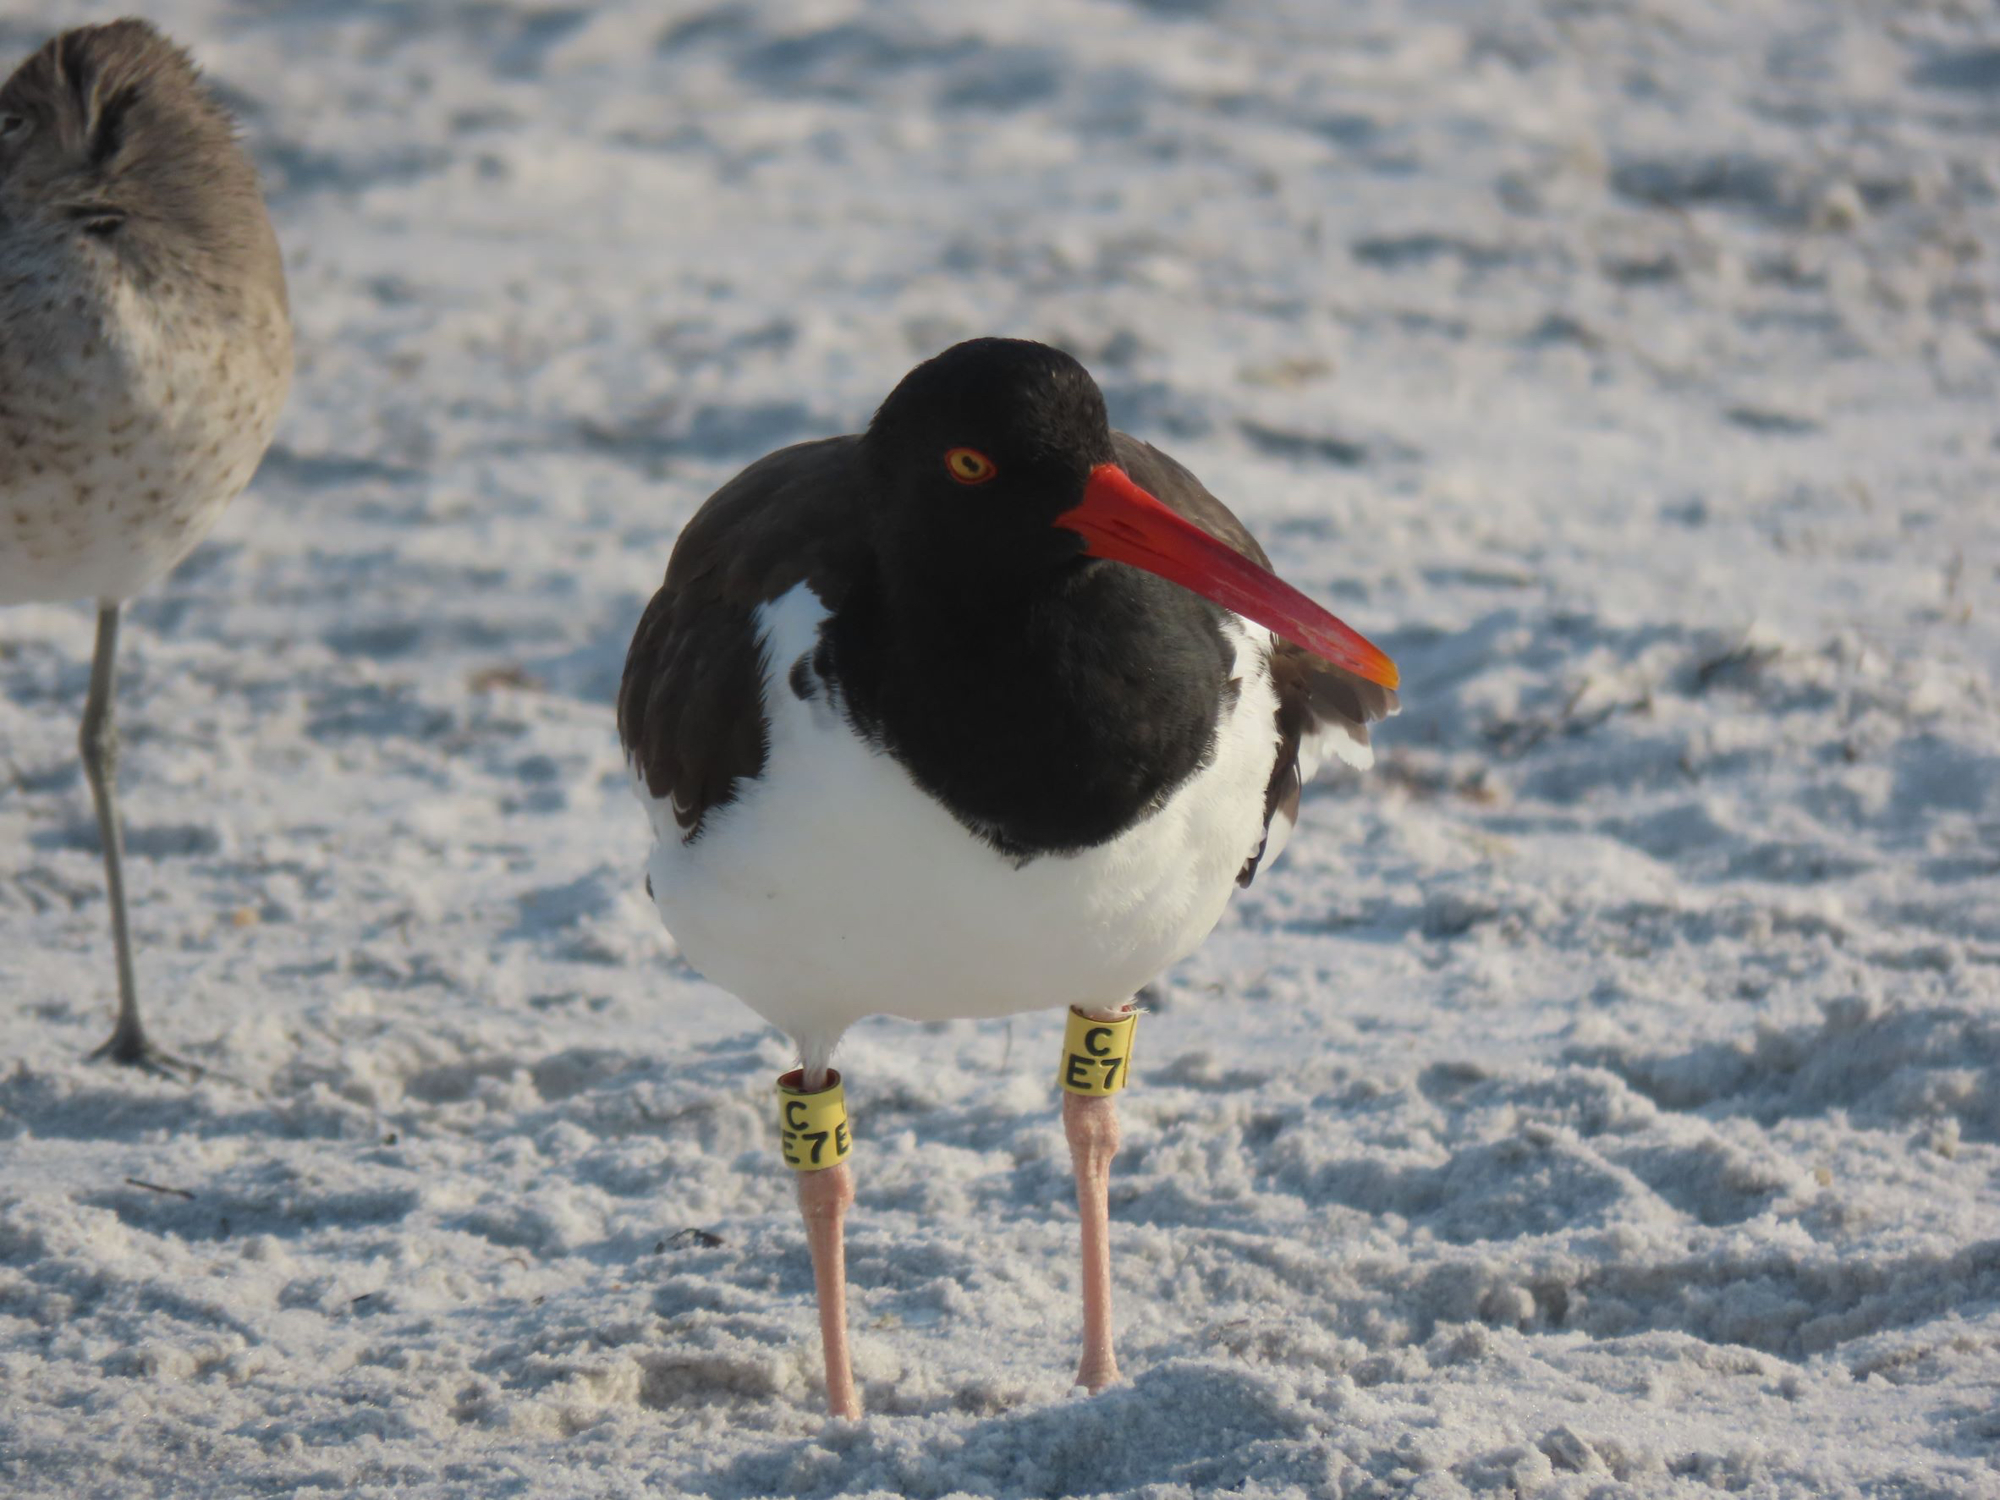 A tagged American oystercatcher showed up on Anna Maria Island recently. Courtesy of Kylie Wilson.